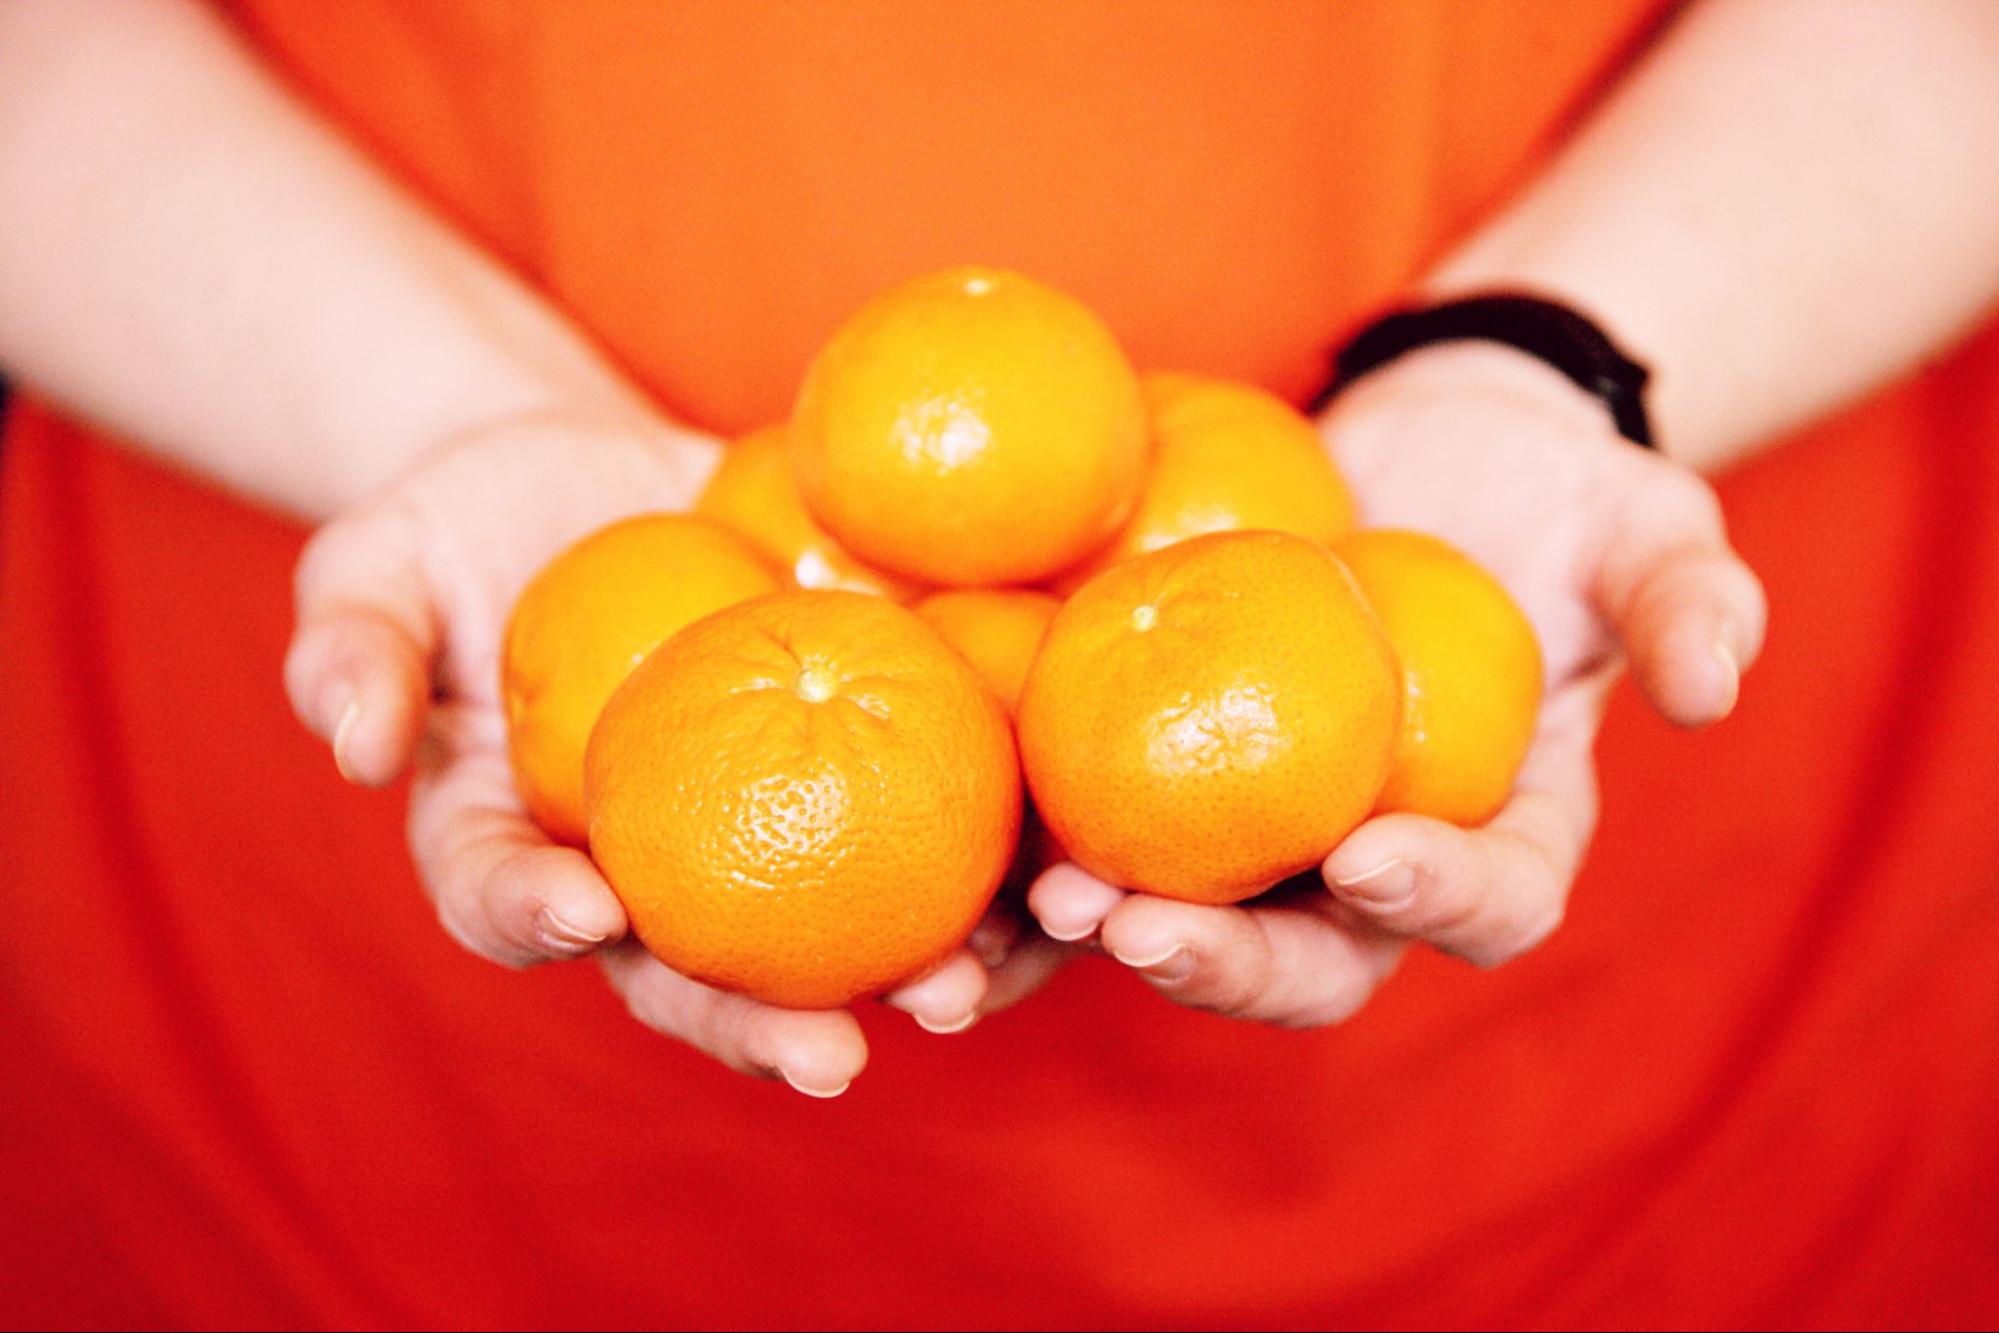 chinese superstitions - place 9 oranges in kitchen